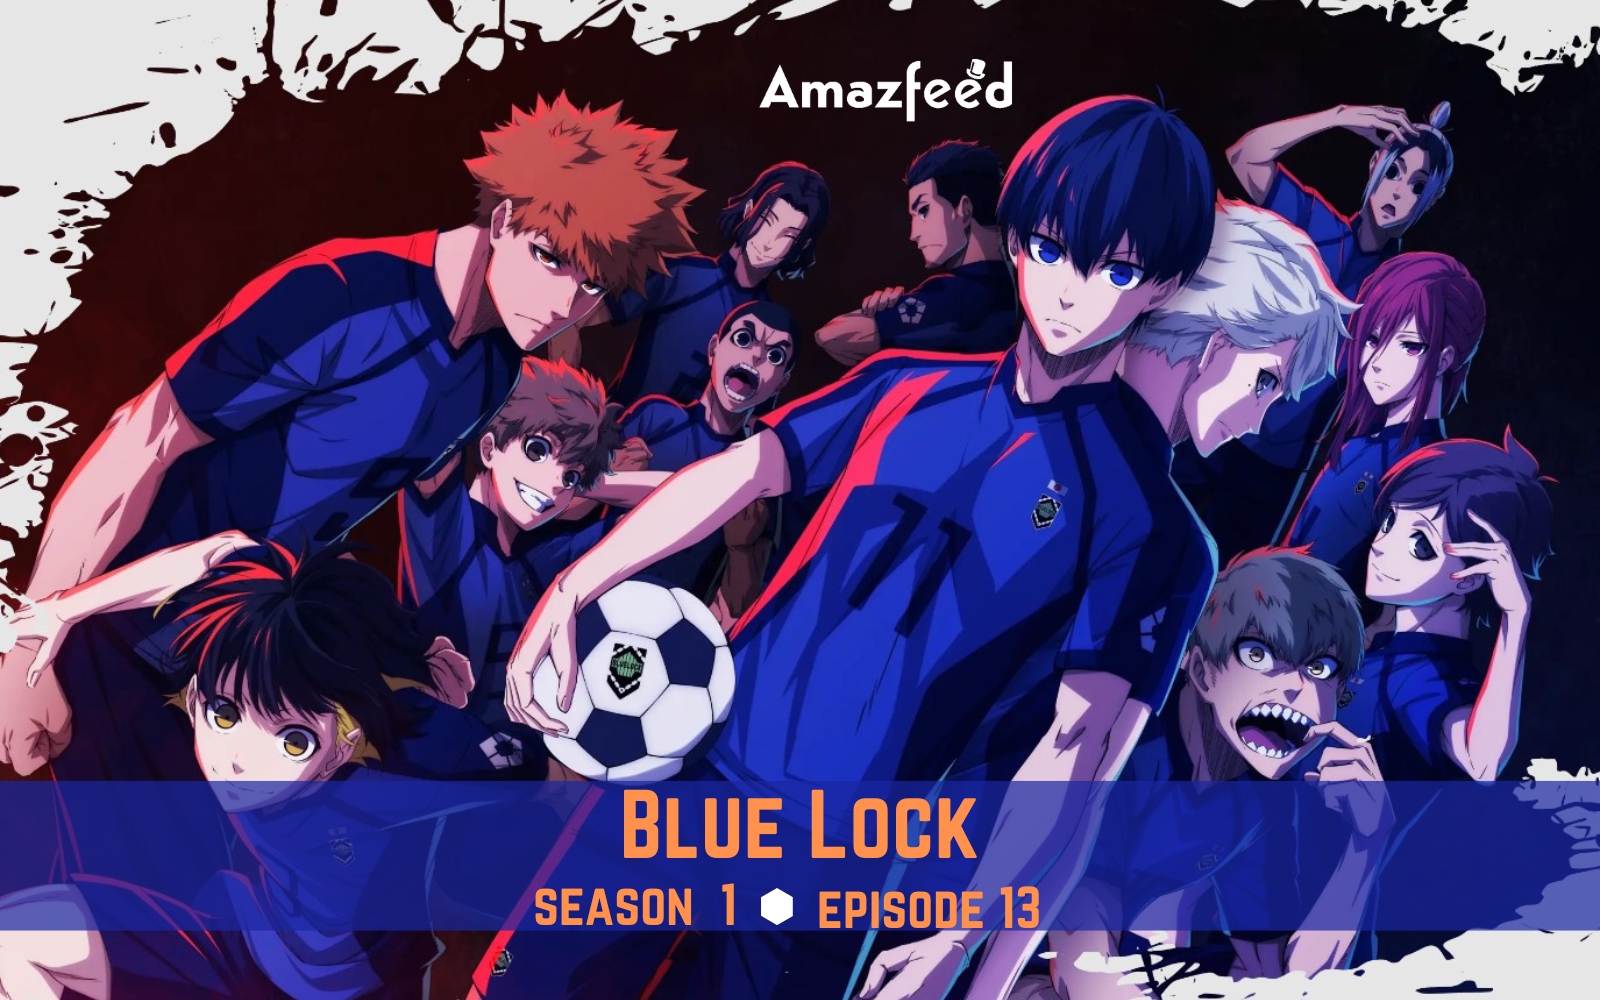 Blue Lock Episode 13 : Latest News, Spoilers, Release Date, Trailer, Cast,  and Recap » Amazfeed